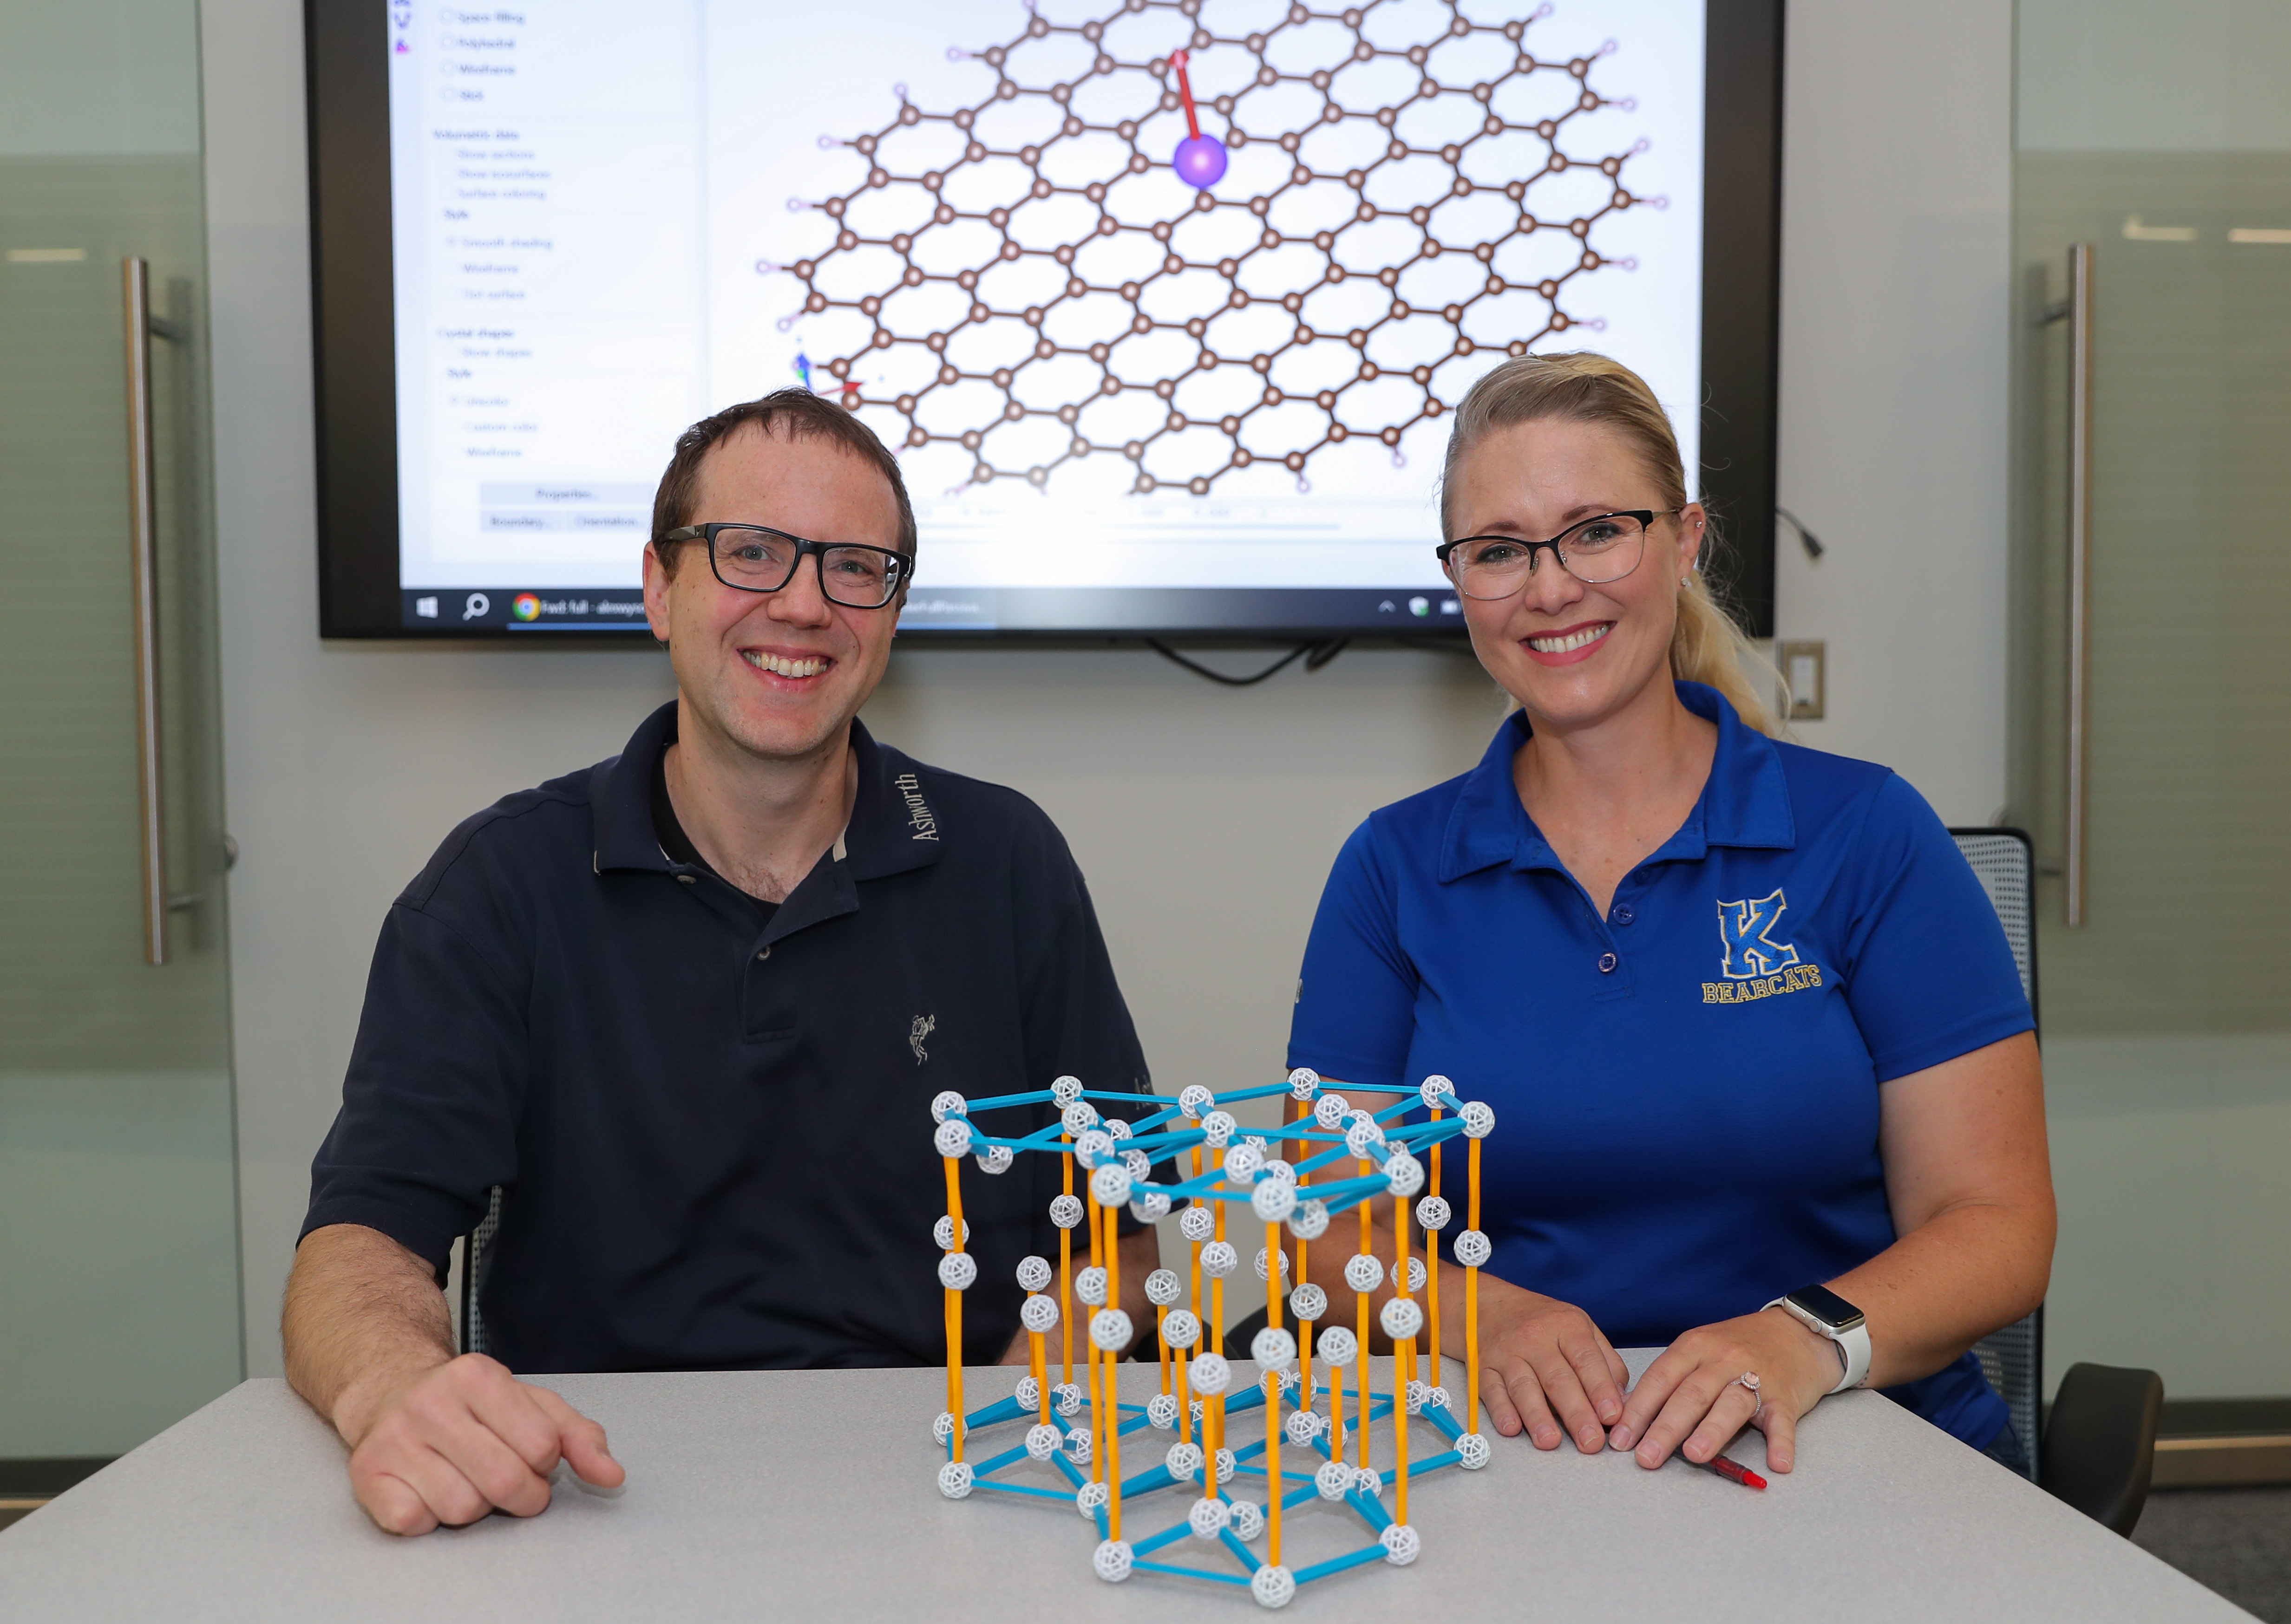 UNK Assistant Professor of Physics Alex Wysocki (left) and Kearney High School chemistry teacher Alison Klein collaborate on quantum materials in the summer of 2023 via an “RET” (Research Experience for Teachers) funded by the NSF via Nebraska EPSCoR.